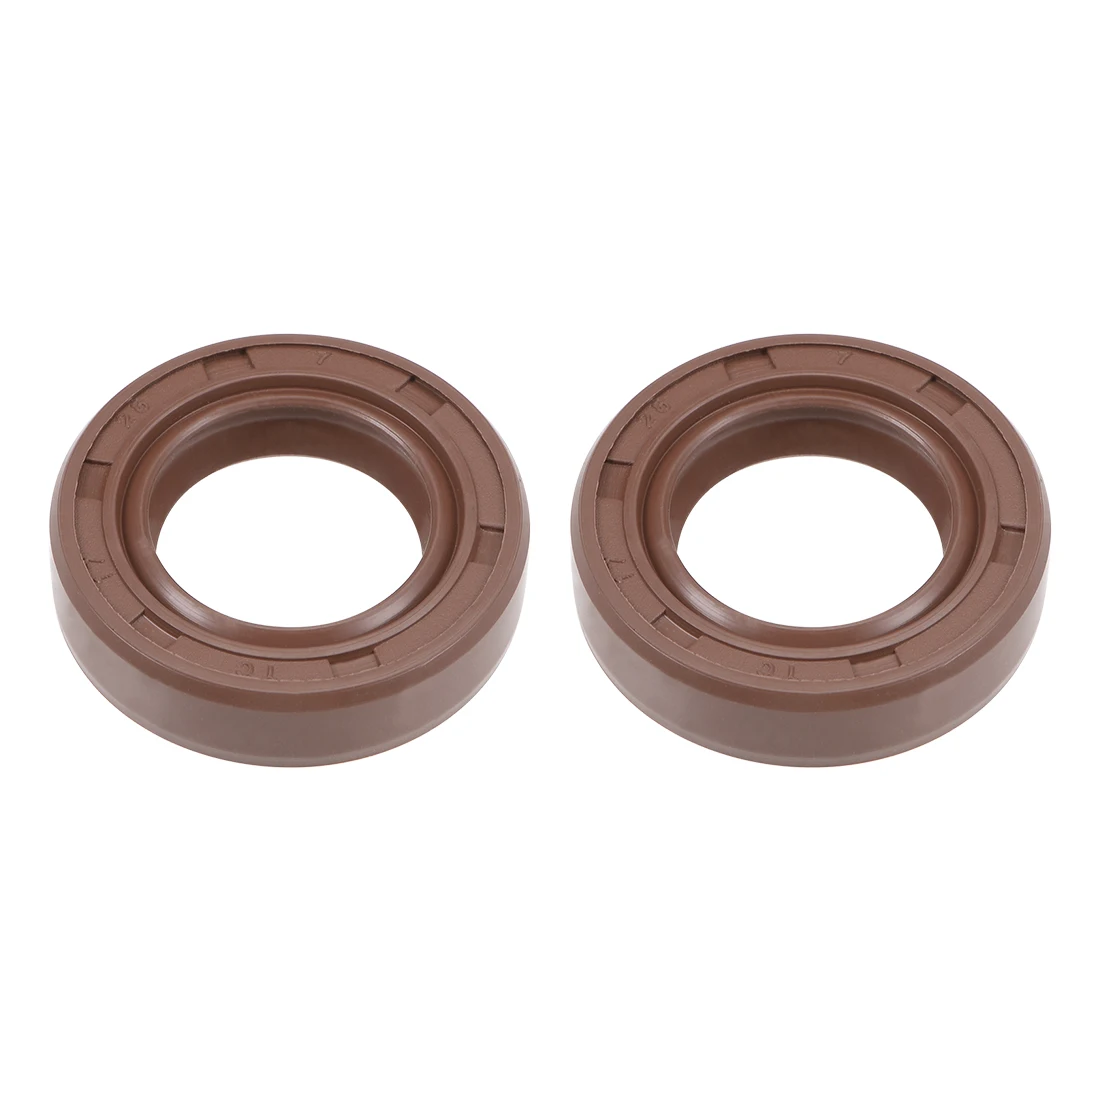 uxcell Oil Seal 17mm Inner Dia 30mm OD 5mm Thick Fluorine Rubber Double Lip Seals 2Pcs